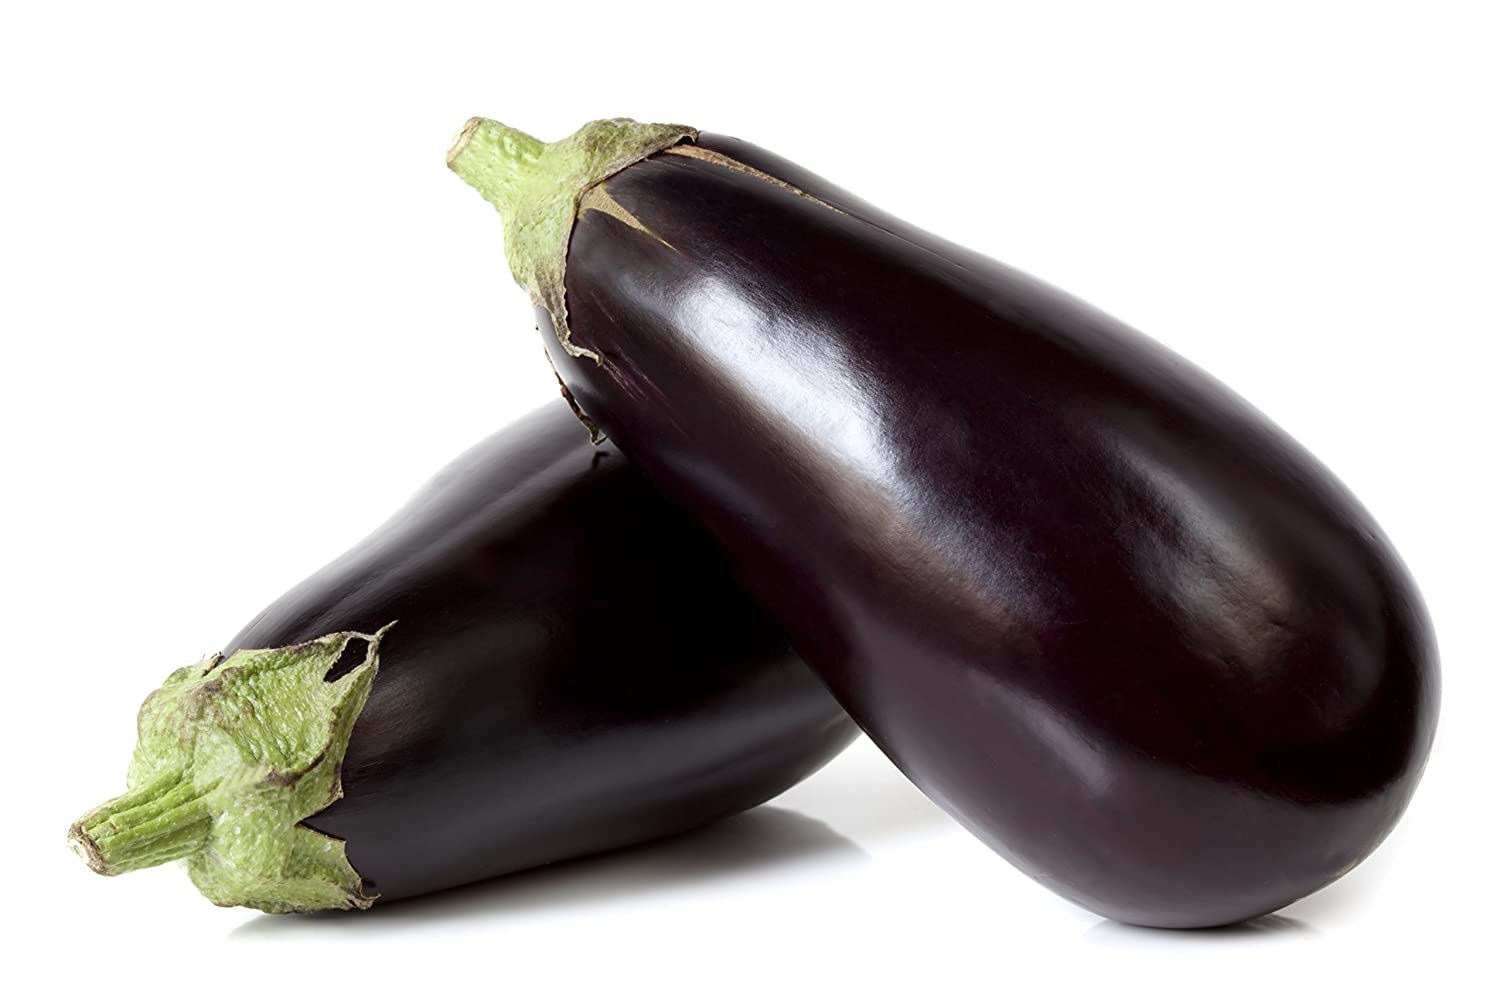 Properties and benefits of eggplant for health, beauty